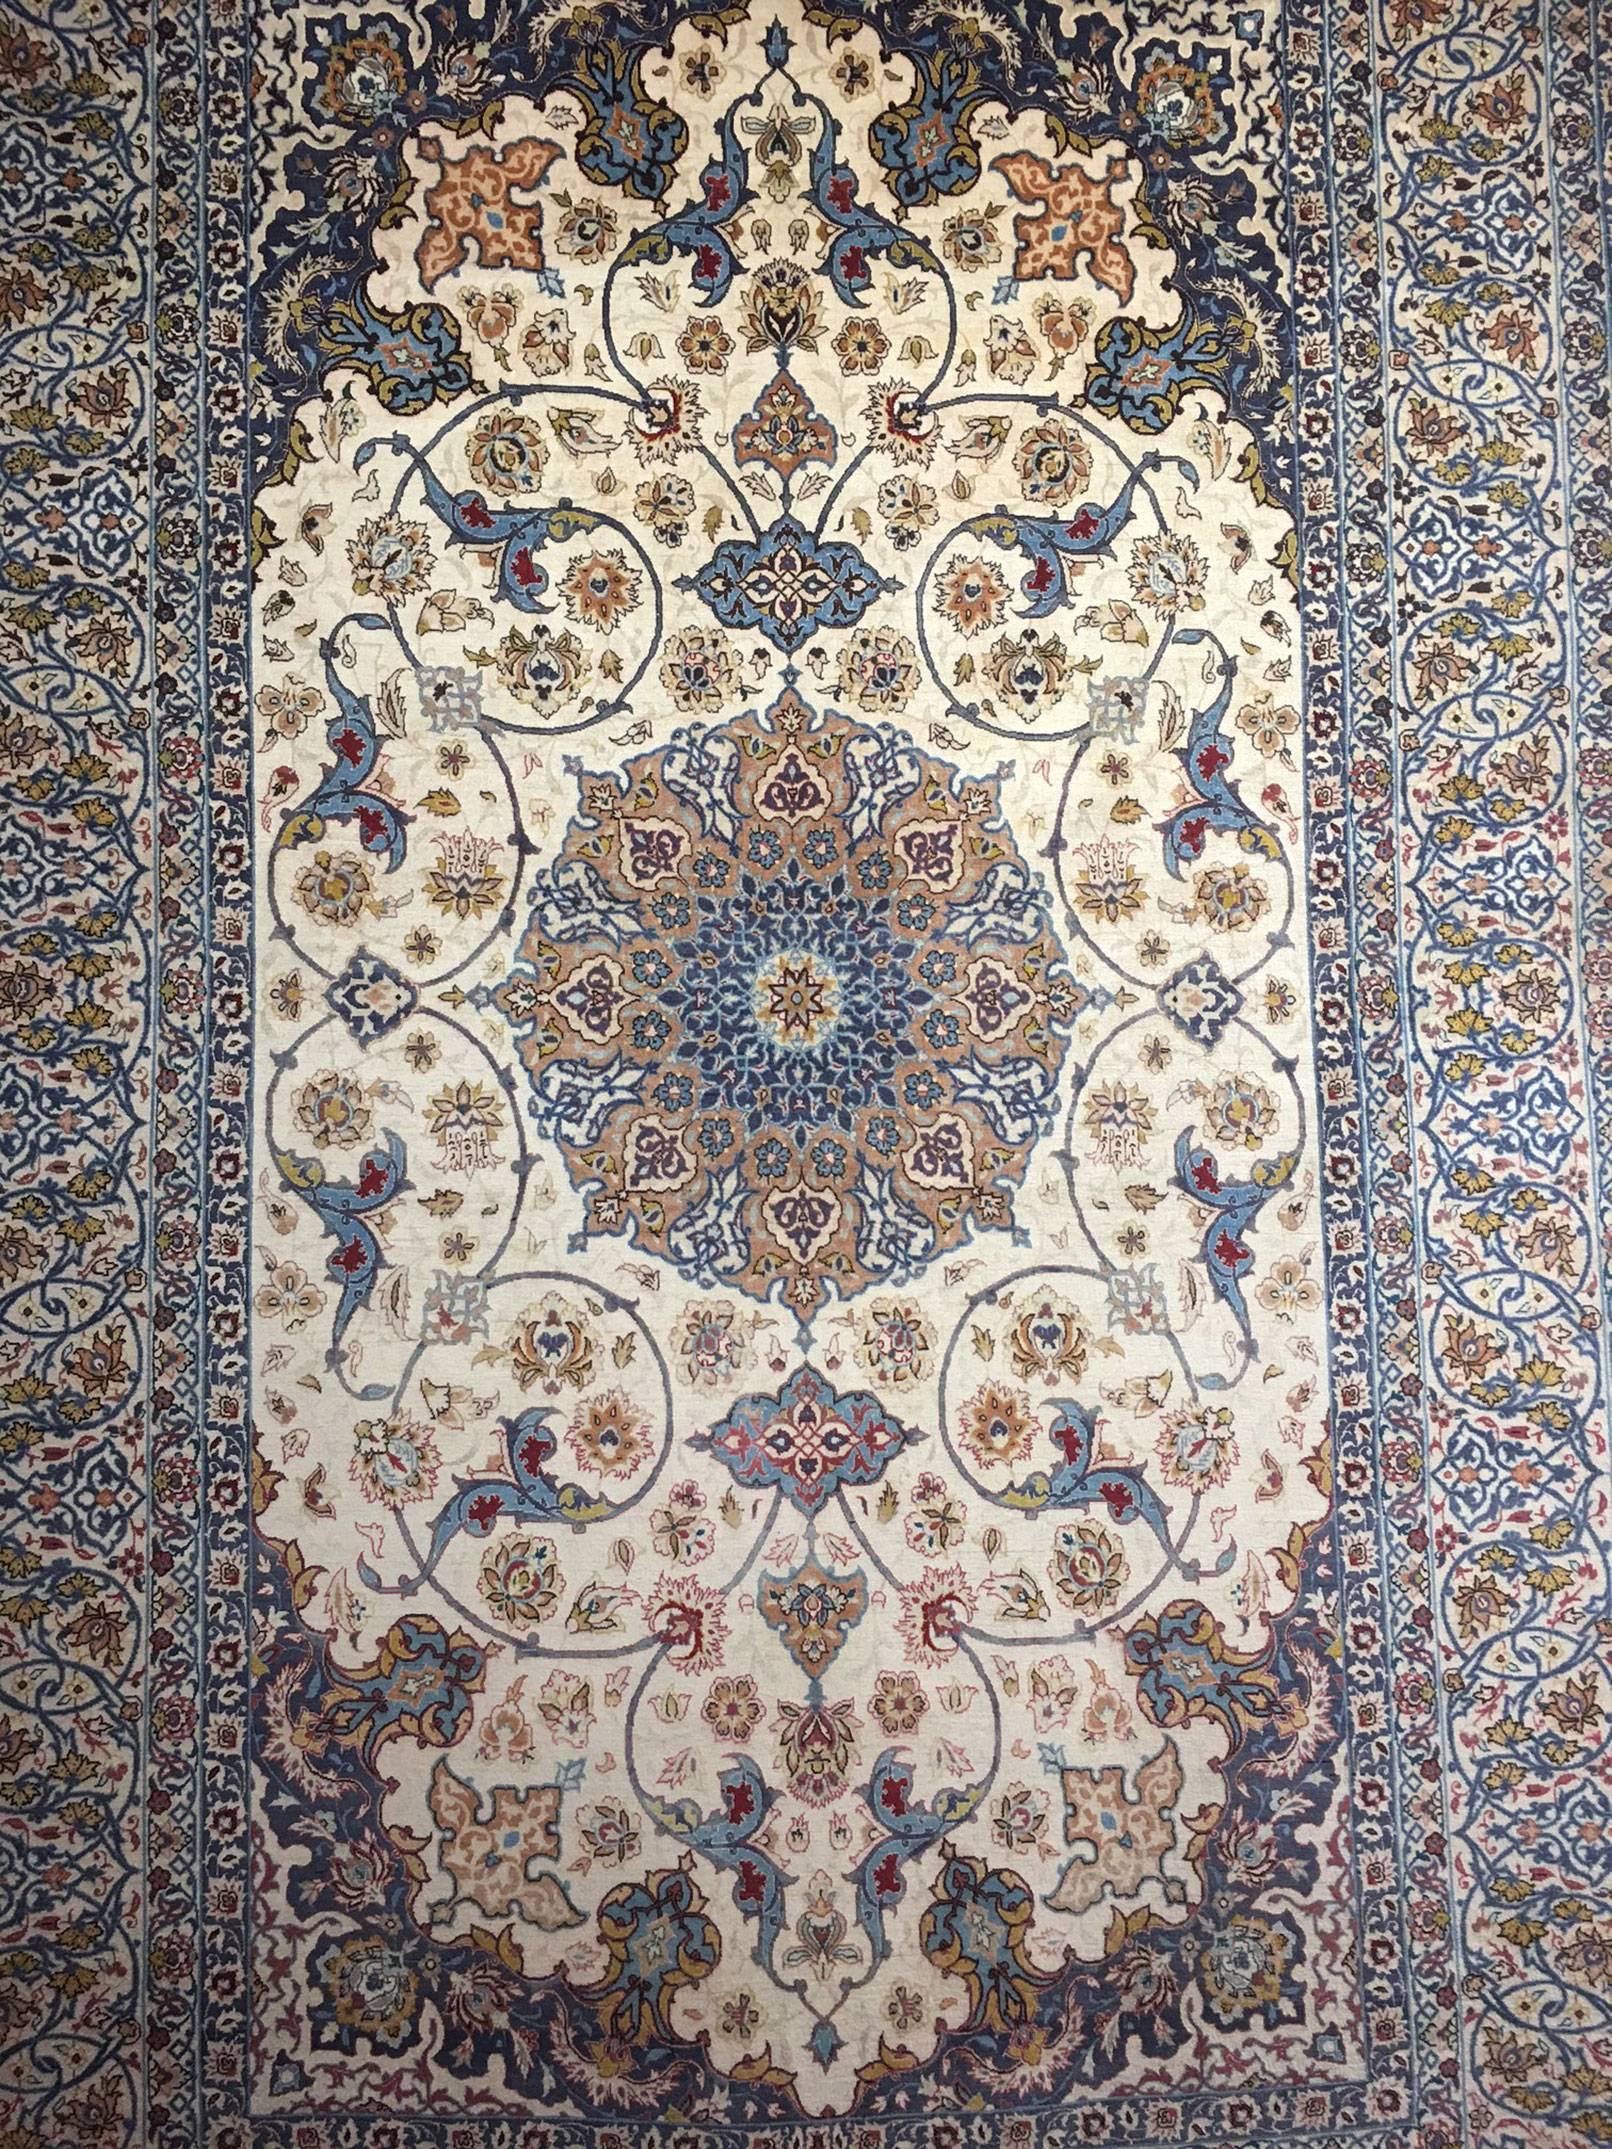 Fabulous Persian Isfahan rug carpet; finely woven; kork wool; silk foundation, Measures: 5' x 8', circa 1940s. The Persian word Kork means soft down. This expression is used for particularly fine and soft wool for very high quality rugs, especially